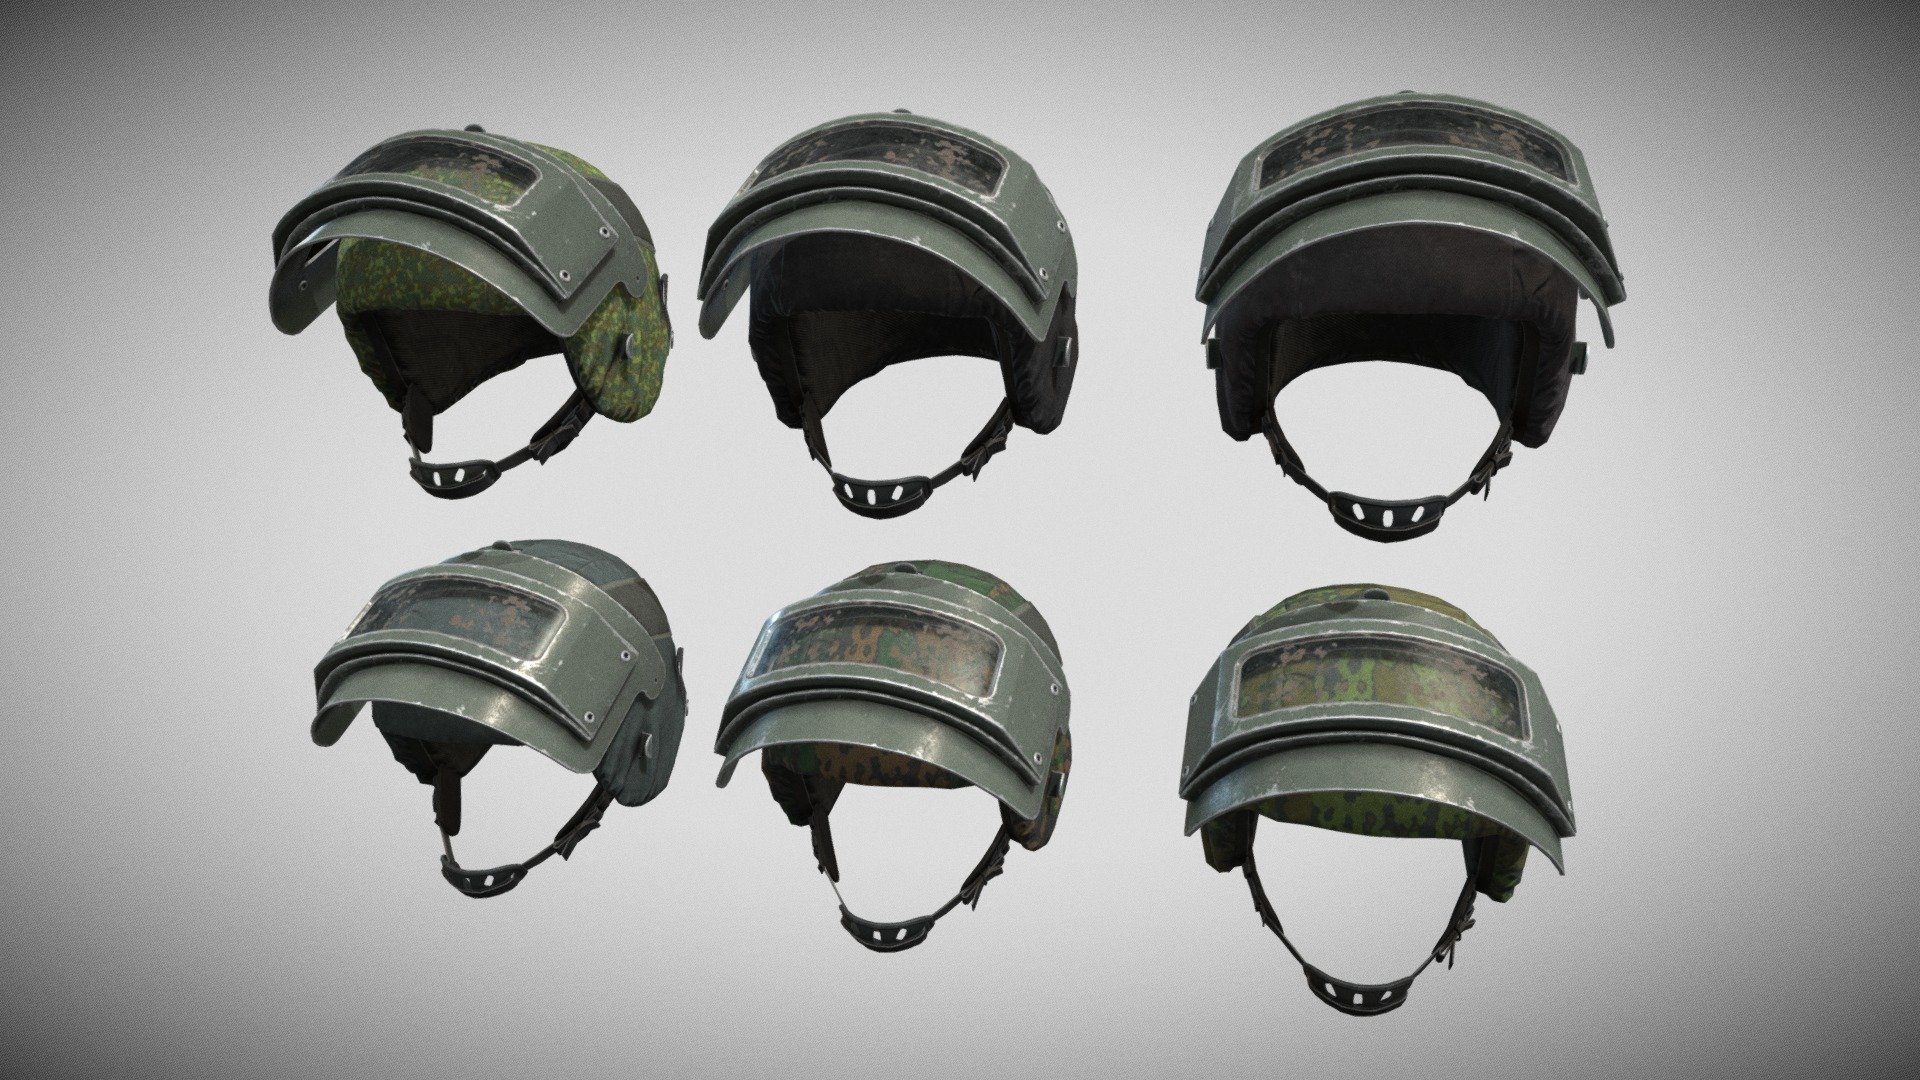 Game-Ready PBR low-poly model of a US modern helmet. All materials and textures are included. The textures of the model are applied with UV Unwrap. Normal map was baked from a high poly model. Including 3dsmax and Blender, OBJ and FBX.

2982 polygons
5370 triangles
2828 vertices

Maps:

helmet_AO.tga, helmet_Glossiness.tga, helmet_Roughness.tga, helmet_Metallic.tga, helmet_Curvature.tga,helmet_Specular.tga, helmet_Normal.tga, helmet_BaseColor_01.tga &hellip; helmet_BaseColor_06.tga, helmet_Diffuse_01.tga &hellip; helmet_Diffuse_06.tga (4096x4096)

helmet_glass_BaseColor.tga, helmet_glass_Diffuse.tga, helmet_glass_Glossiness.tga, helmet_glass_Metallic.tga, helmet_glass_Normal.tga, helmet_glass_Opacity.tga, helmet_glass_Roughness.tga, helmet_glass_Specular.tga (2048x2048) - Russian Modern Helmet - Buy Royalty Free 3D model by alpenwolf (@alpen) 3d model